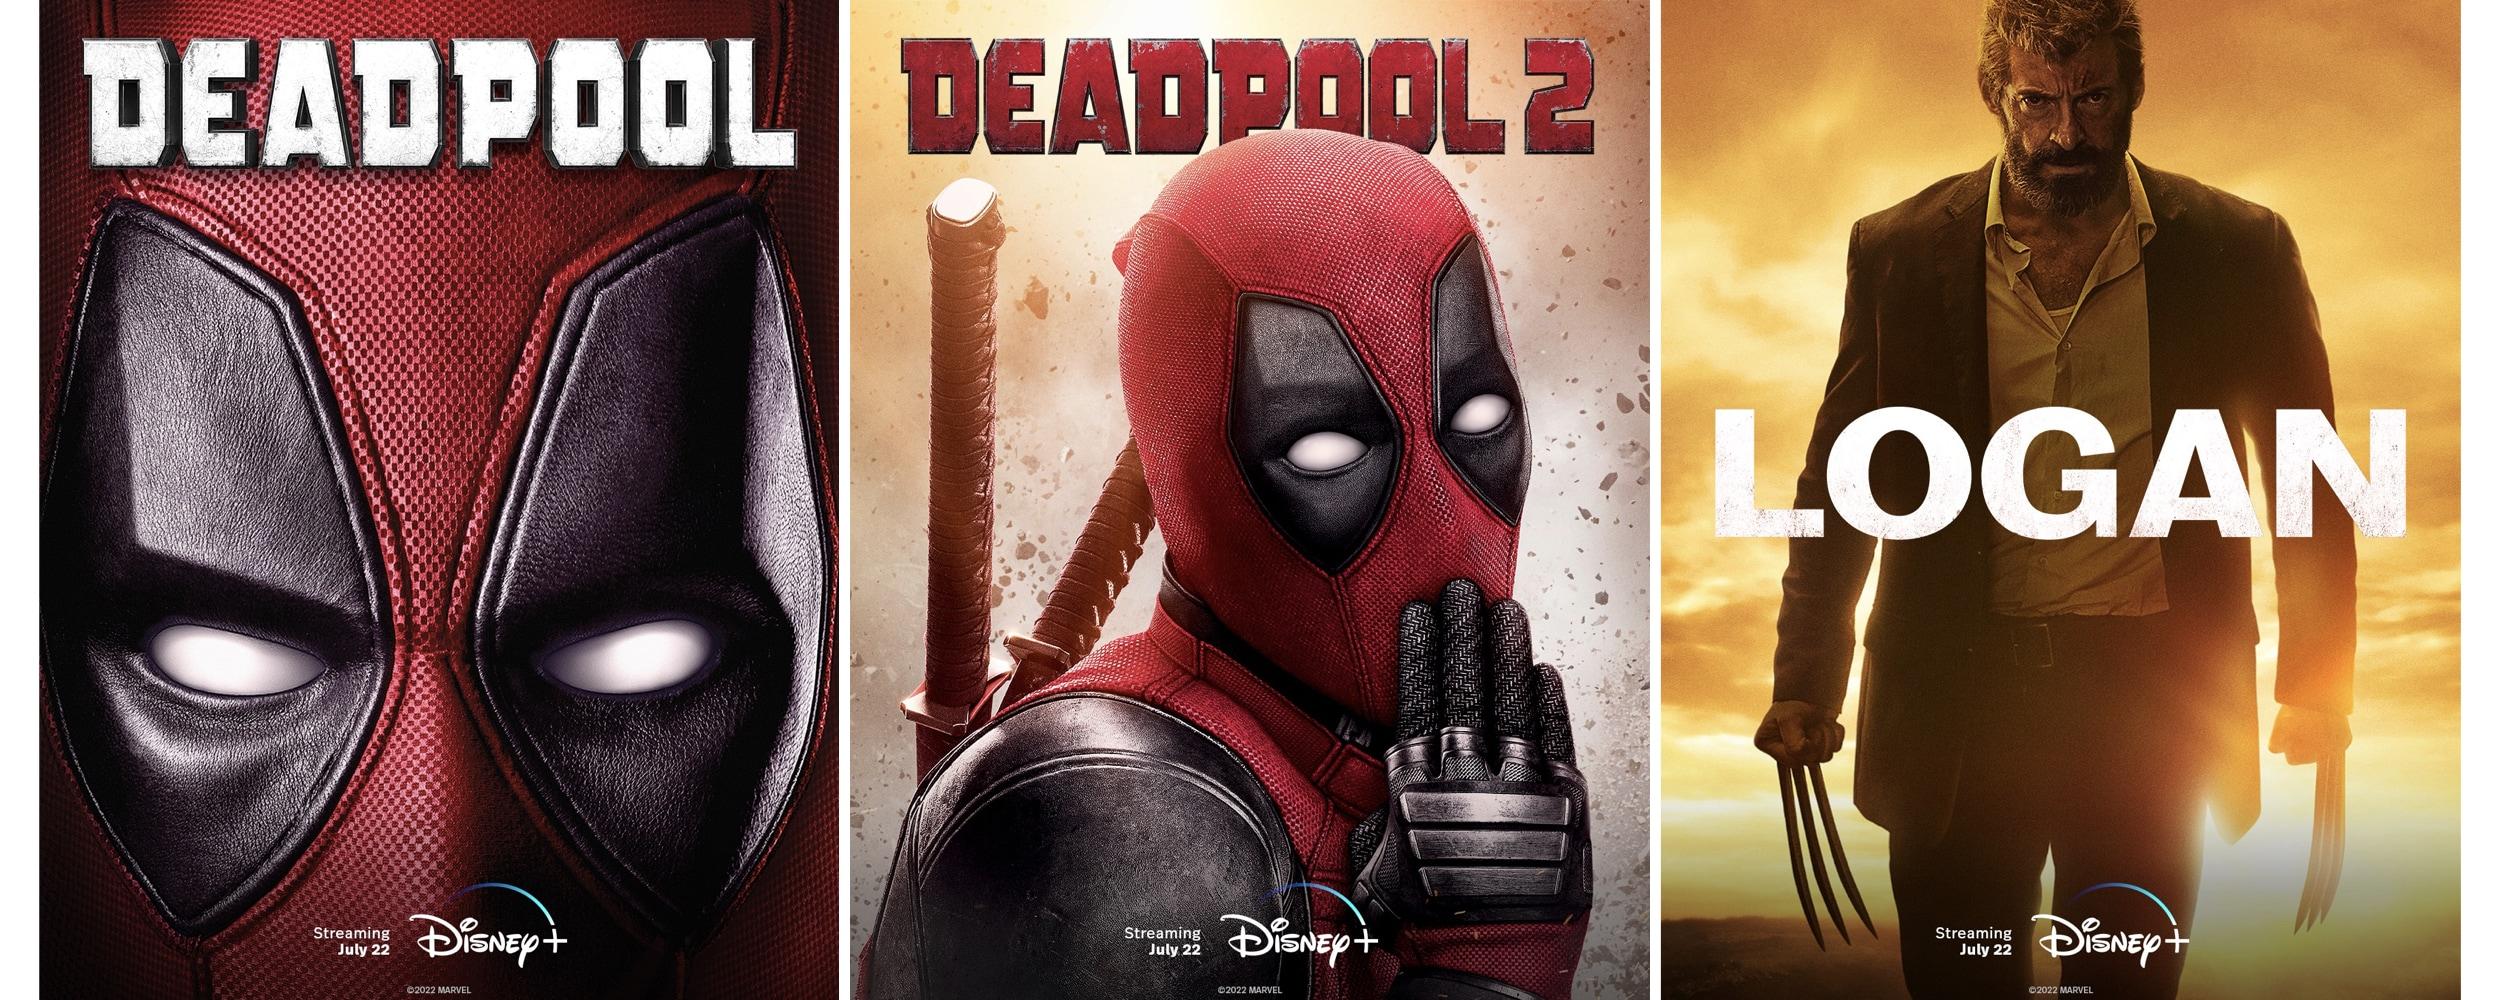 Deadpool And Logan To Join The Marvel Collection On Disney+. “Deadpool,” “ Deadpool 2,” and “Logan” arrive on Disney+ in the . on July 22.  #DisneyPlus #Deadpool #Logan - Criticologos